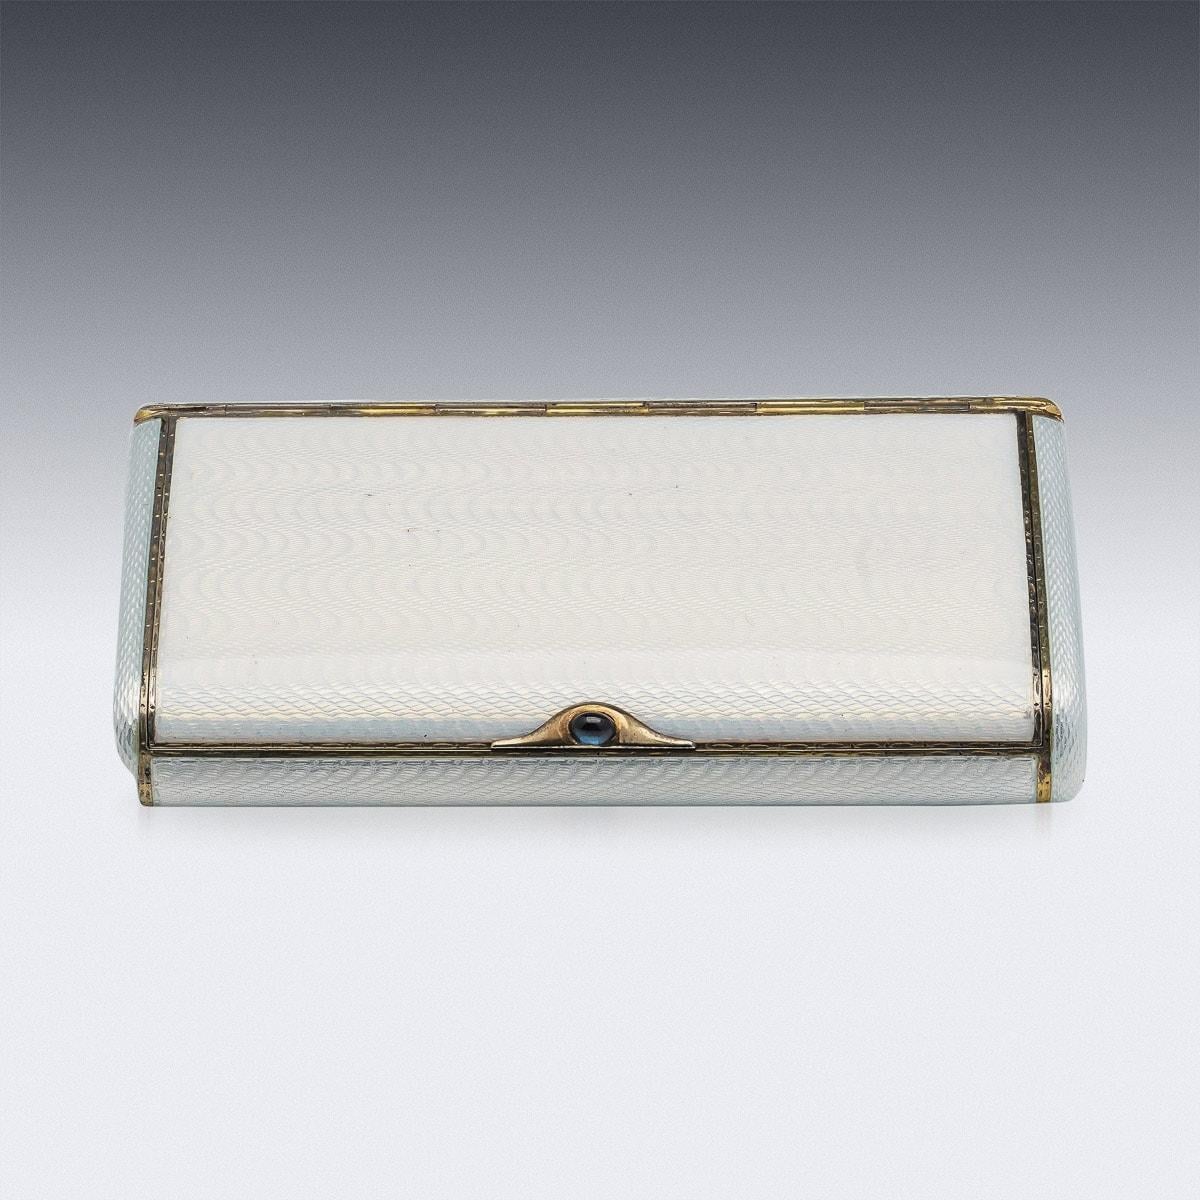 Antique early-20th century Imperial Russian silver-gilt & guilloche enamel cigarette case, rectangular form with rounded corners, body enameled in translucent opalescent white over a engine-turned ground, the gold thumb piece mounted with finely set